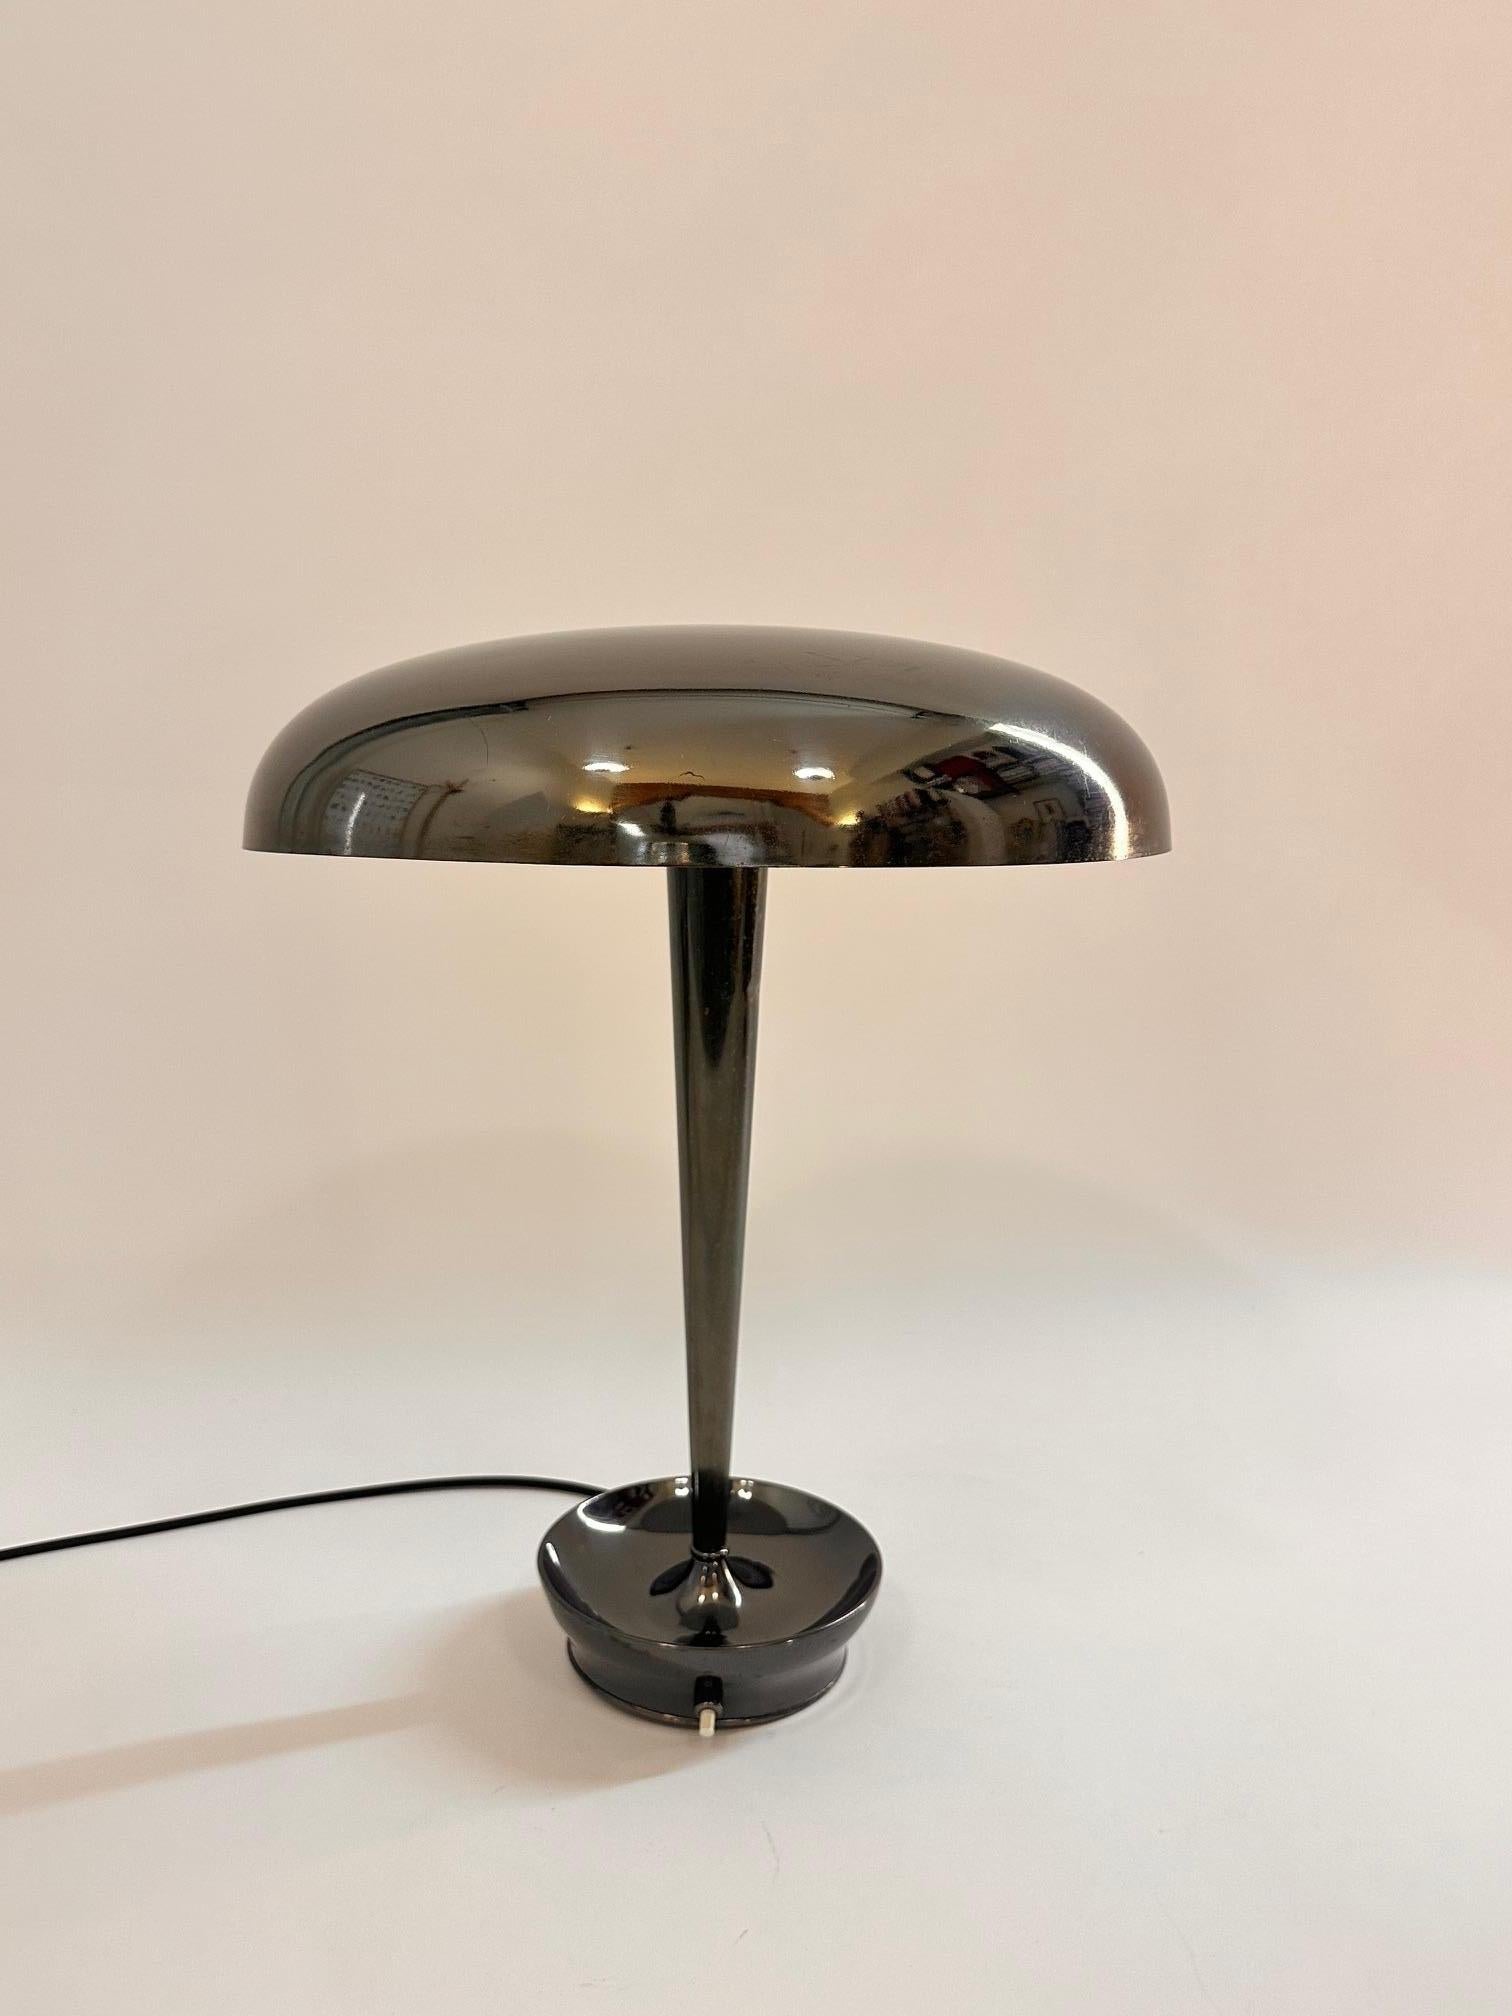 An original Stilnovo desk lamp ,Model D. 4639..Patinated brassin black.Very good condition . Full fonction.Free package and shipping .
Literature: